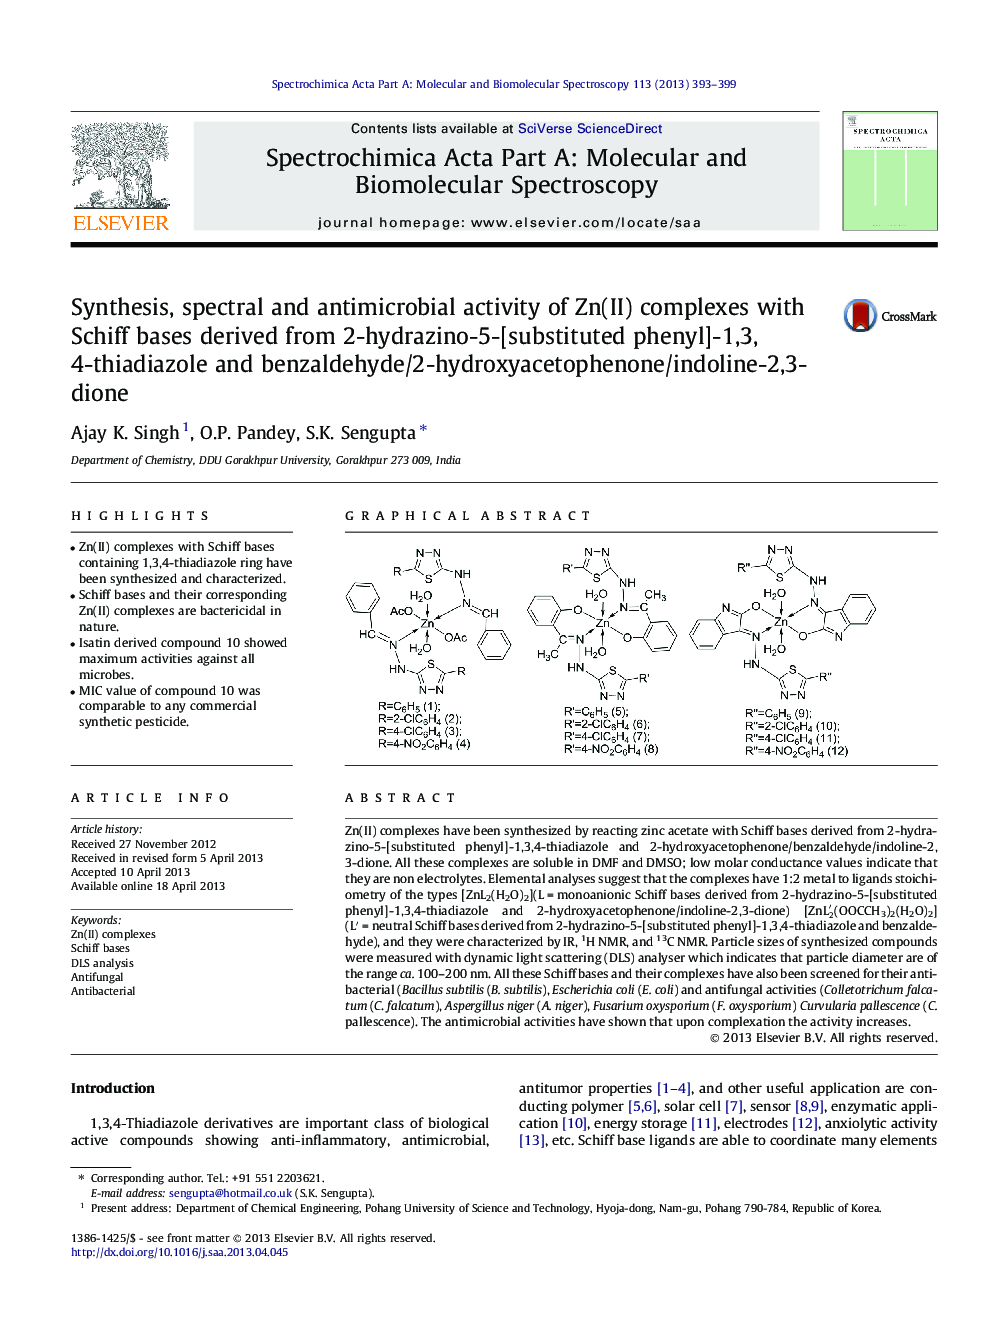 Synthesis, spectral and antimicrobial activity of Zn(II) complexes with Schiff bases derived from 2-hydrazino-5-[substituted phenyl]-1,3,4-thiadiazole and benzaldehyde/2-hydroxyacetophenone/indoline-2,3-dione